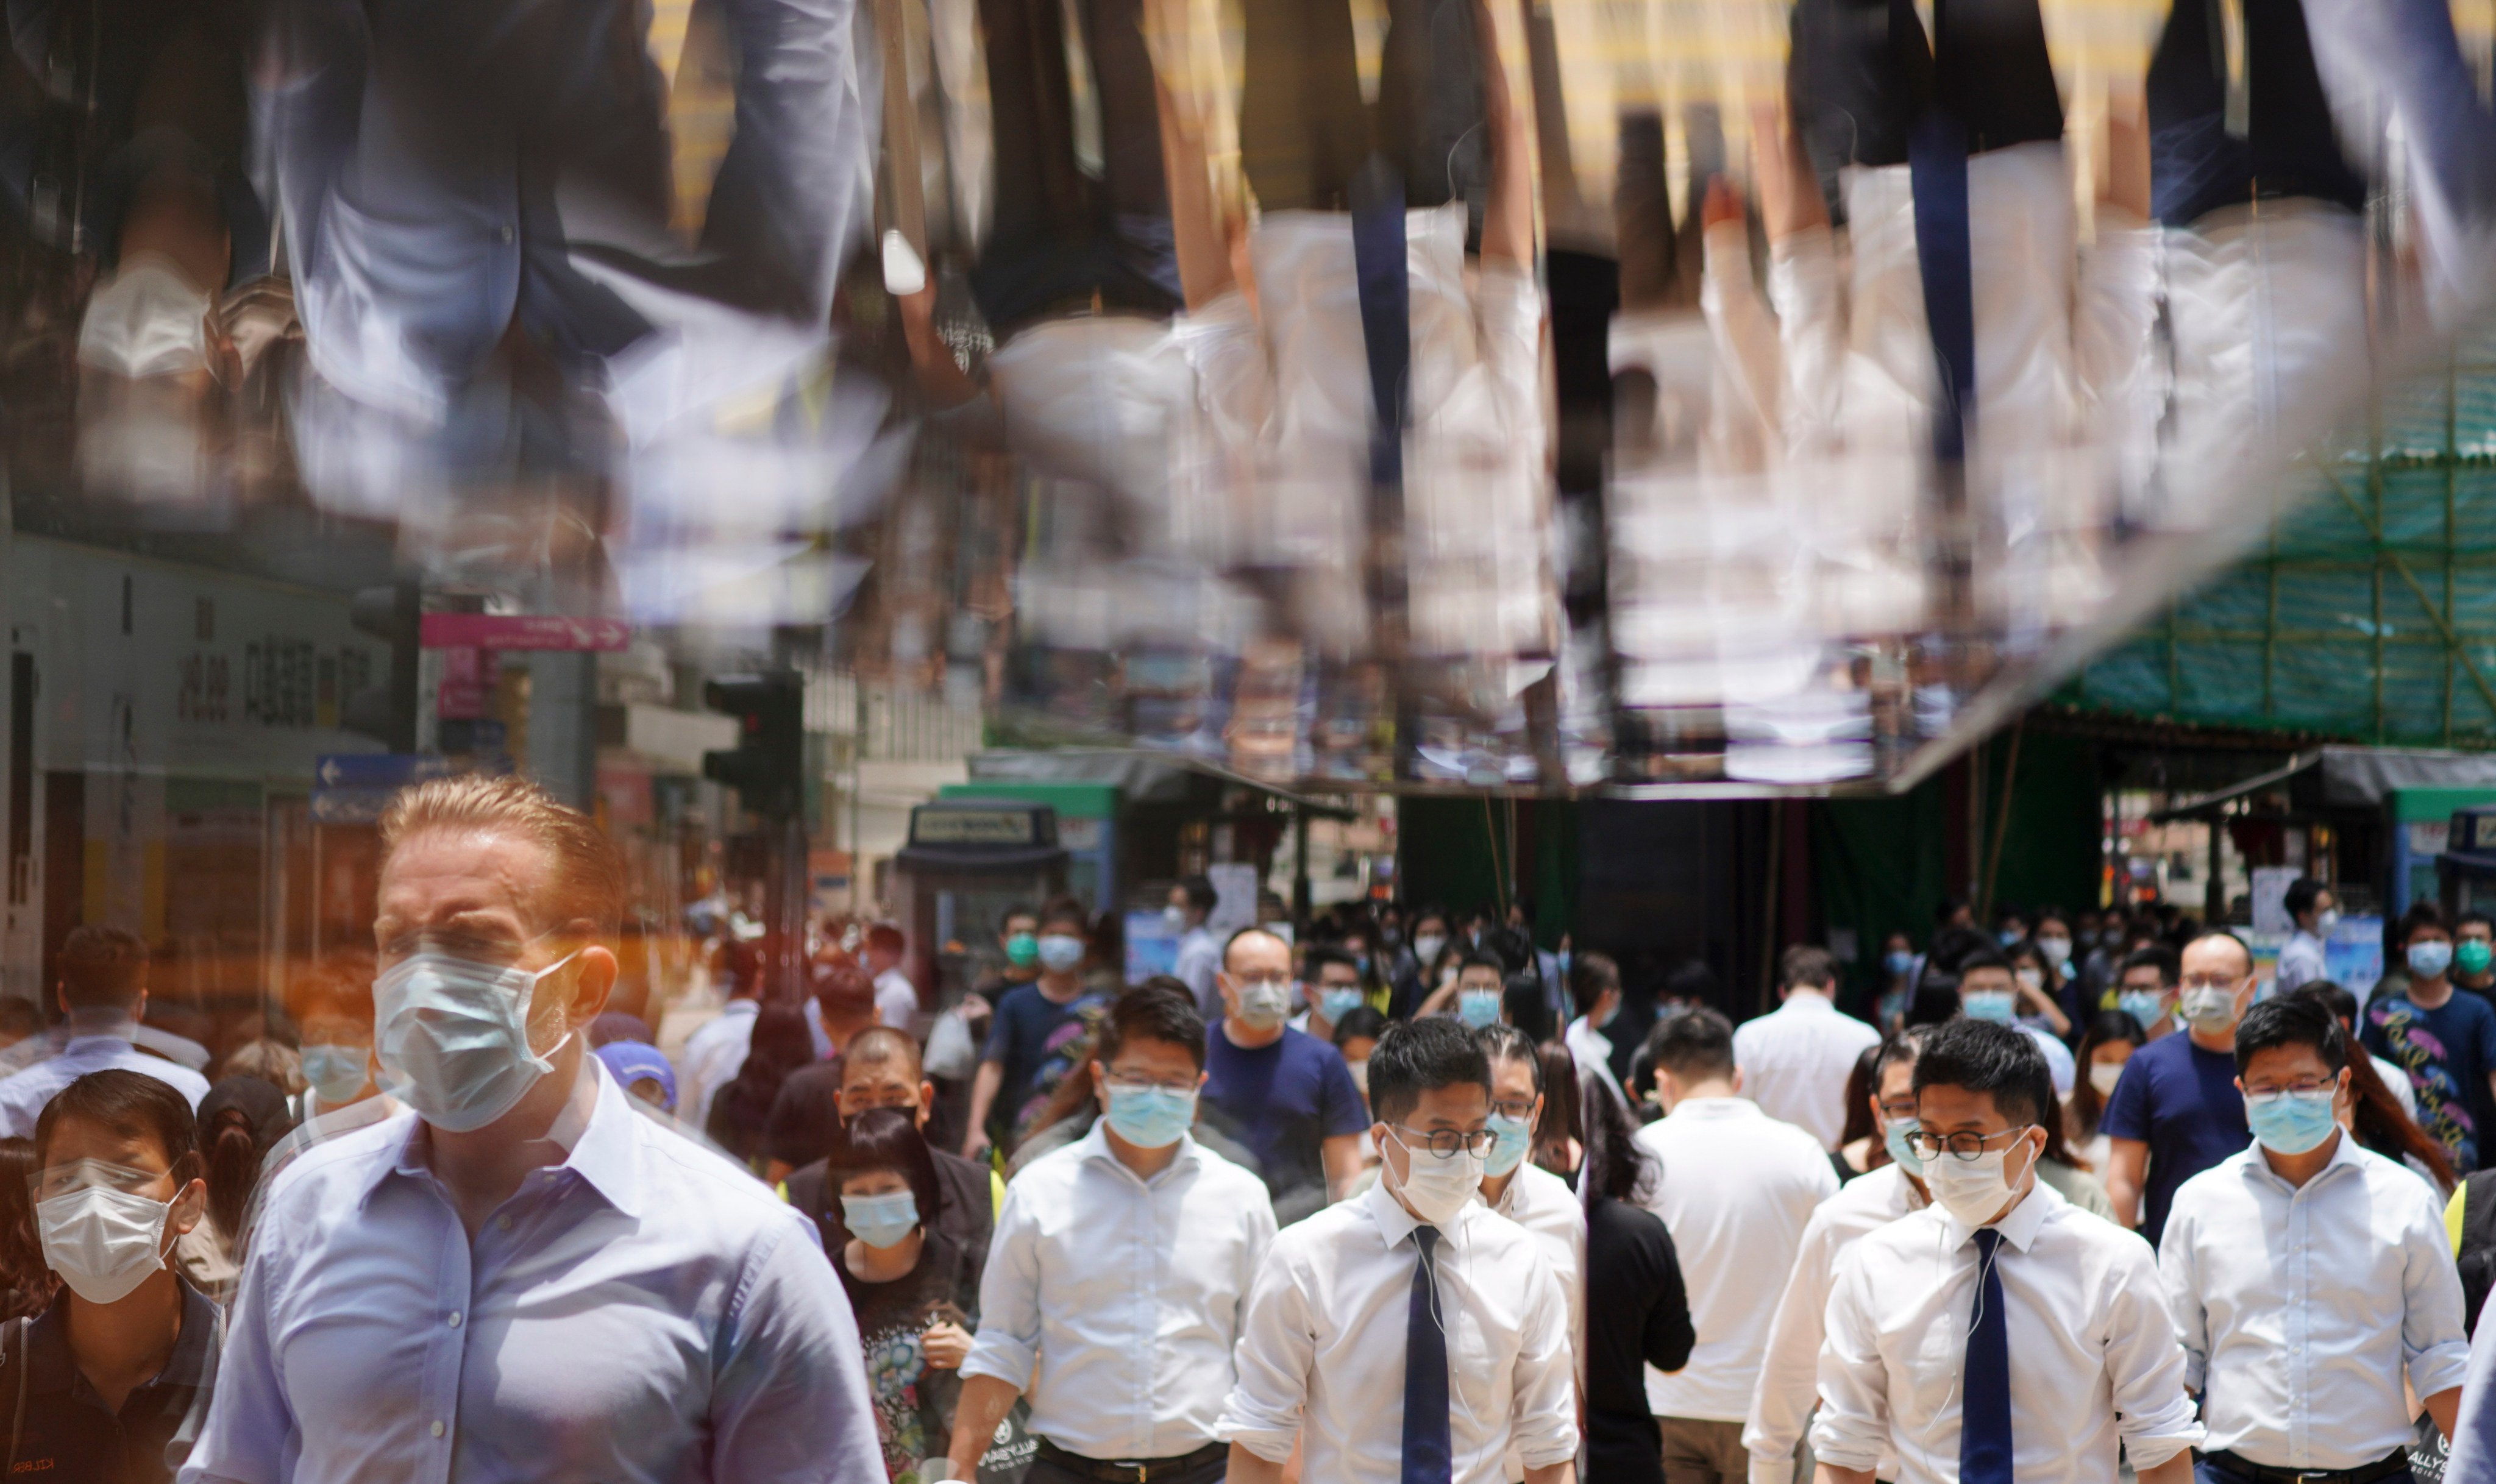 People across the street during lunch time in Central in May 2020. Hong Kong’s talent scheme has so far mostly attracted other Chinese people. Photo: Sam Tsang